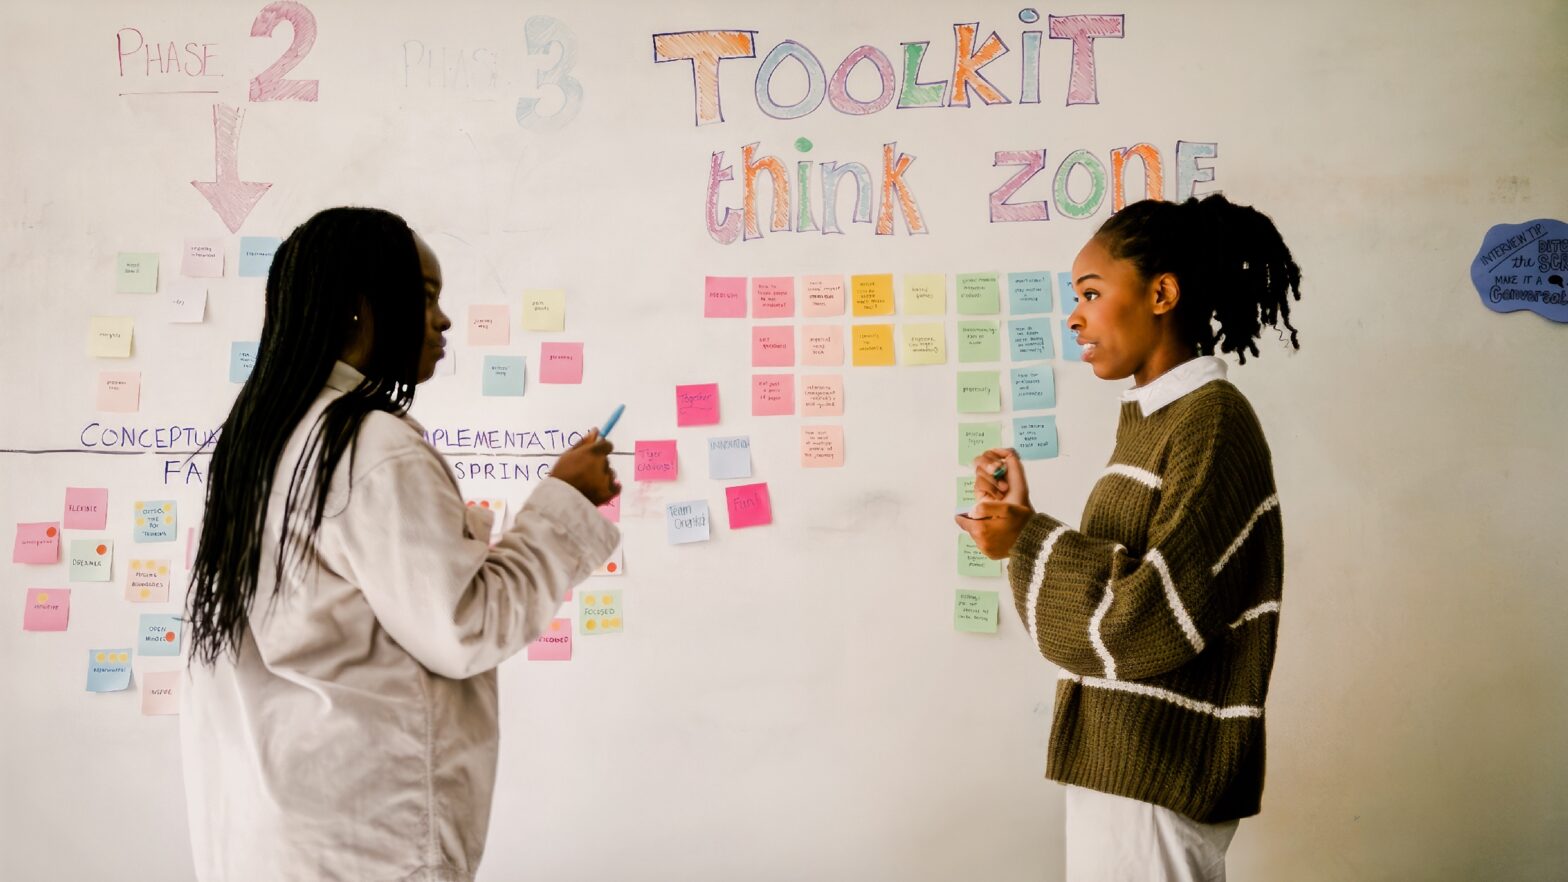 Two students talk in front of large white board covered with sticky notes and writing.